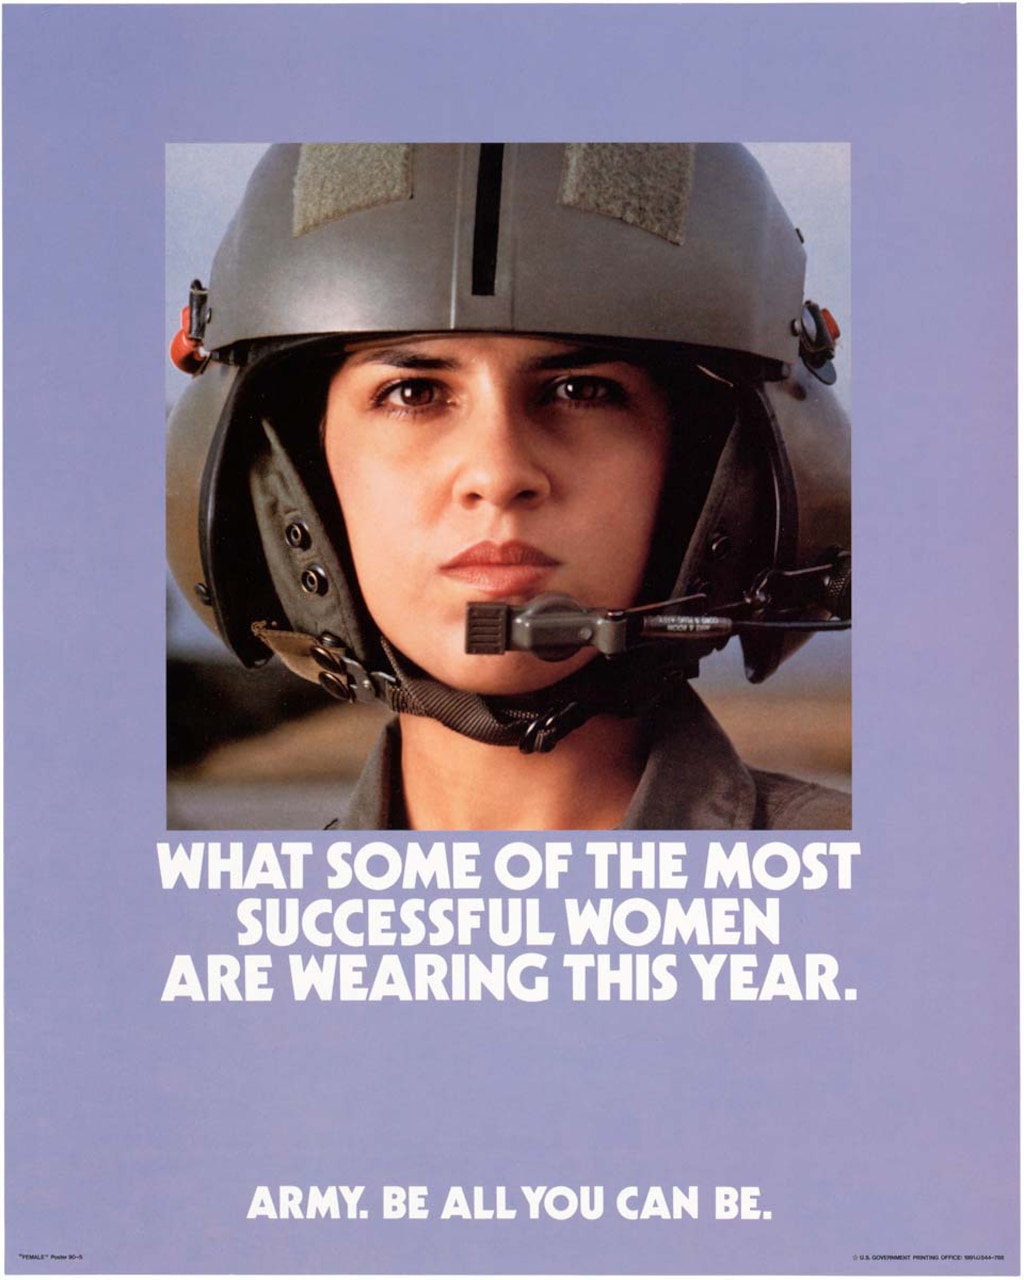 Poster with female soldier in helmet and text: "WHAT SOME OF THE MOST SUCCESSFUL WOMEN ARE WEARING THIS YEAR."